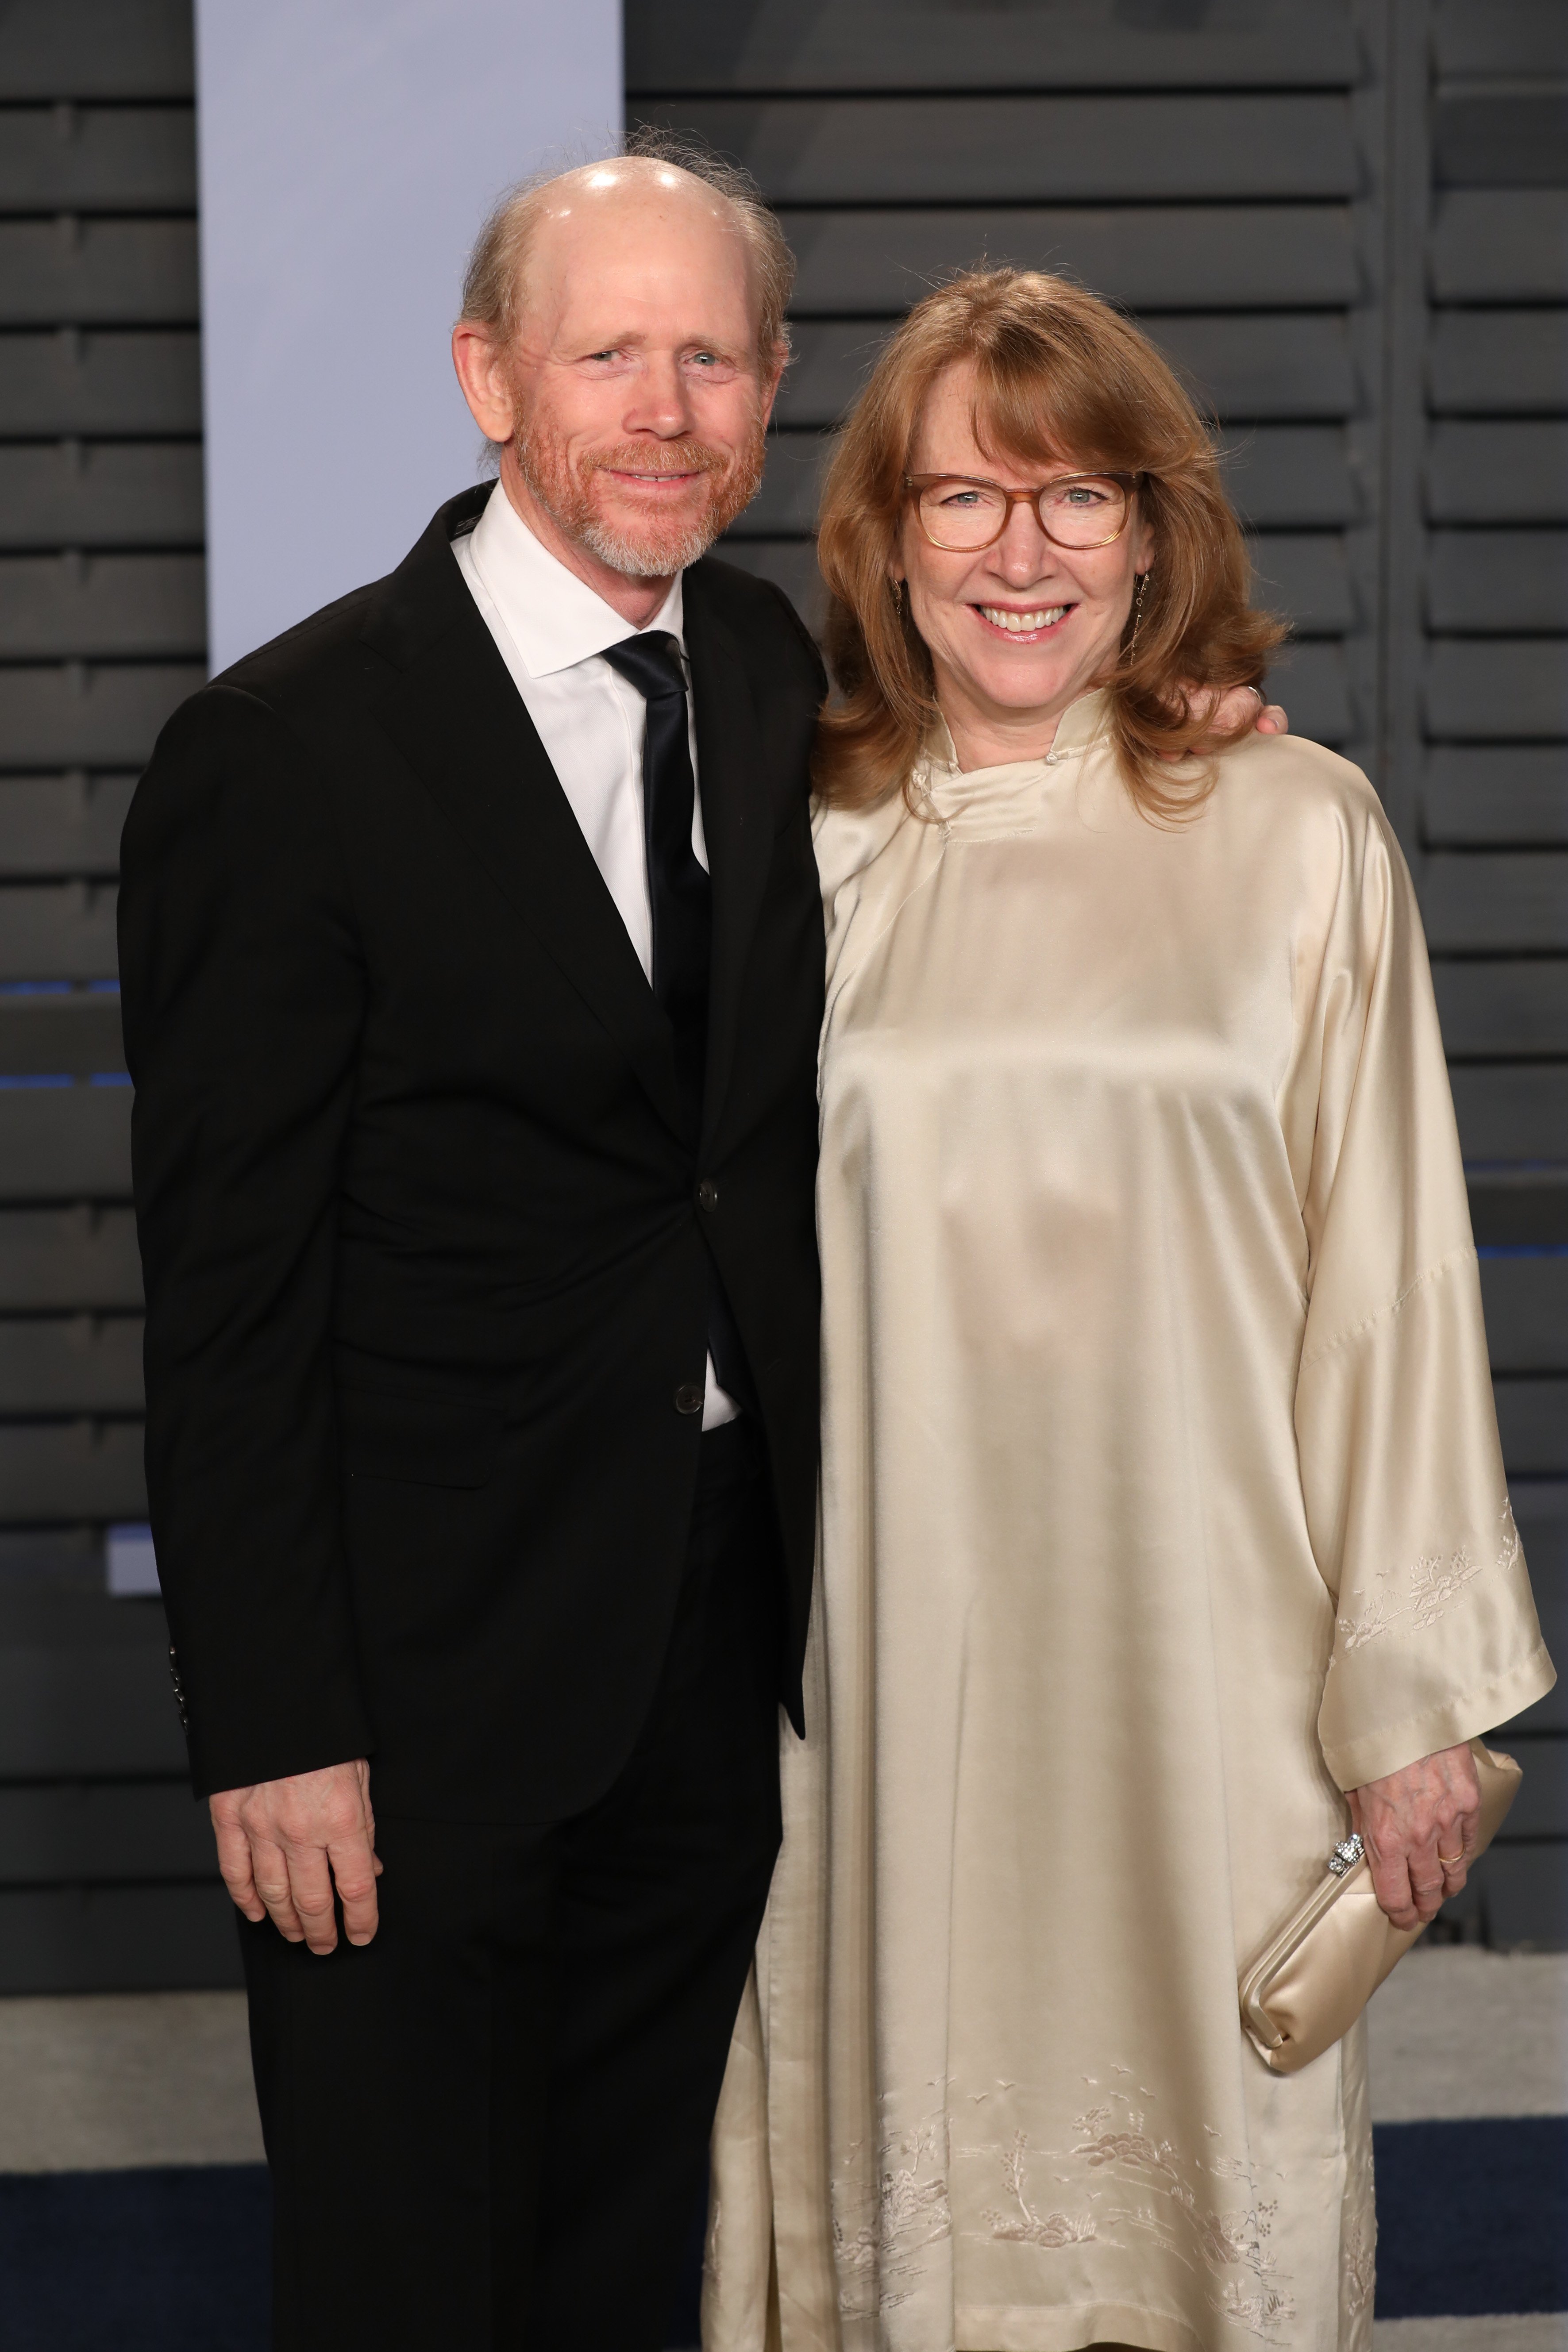 Ron Howard and Cheryl Howard during the 2018 Vanity Fair Oscar Party hosted by Radhika Jones at Wallis Annenberg Center for the Performing Arts on March 04, 2018 in Beverly Hills, California. | Source: Getty Images